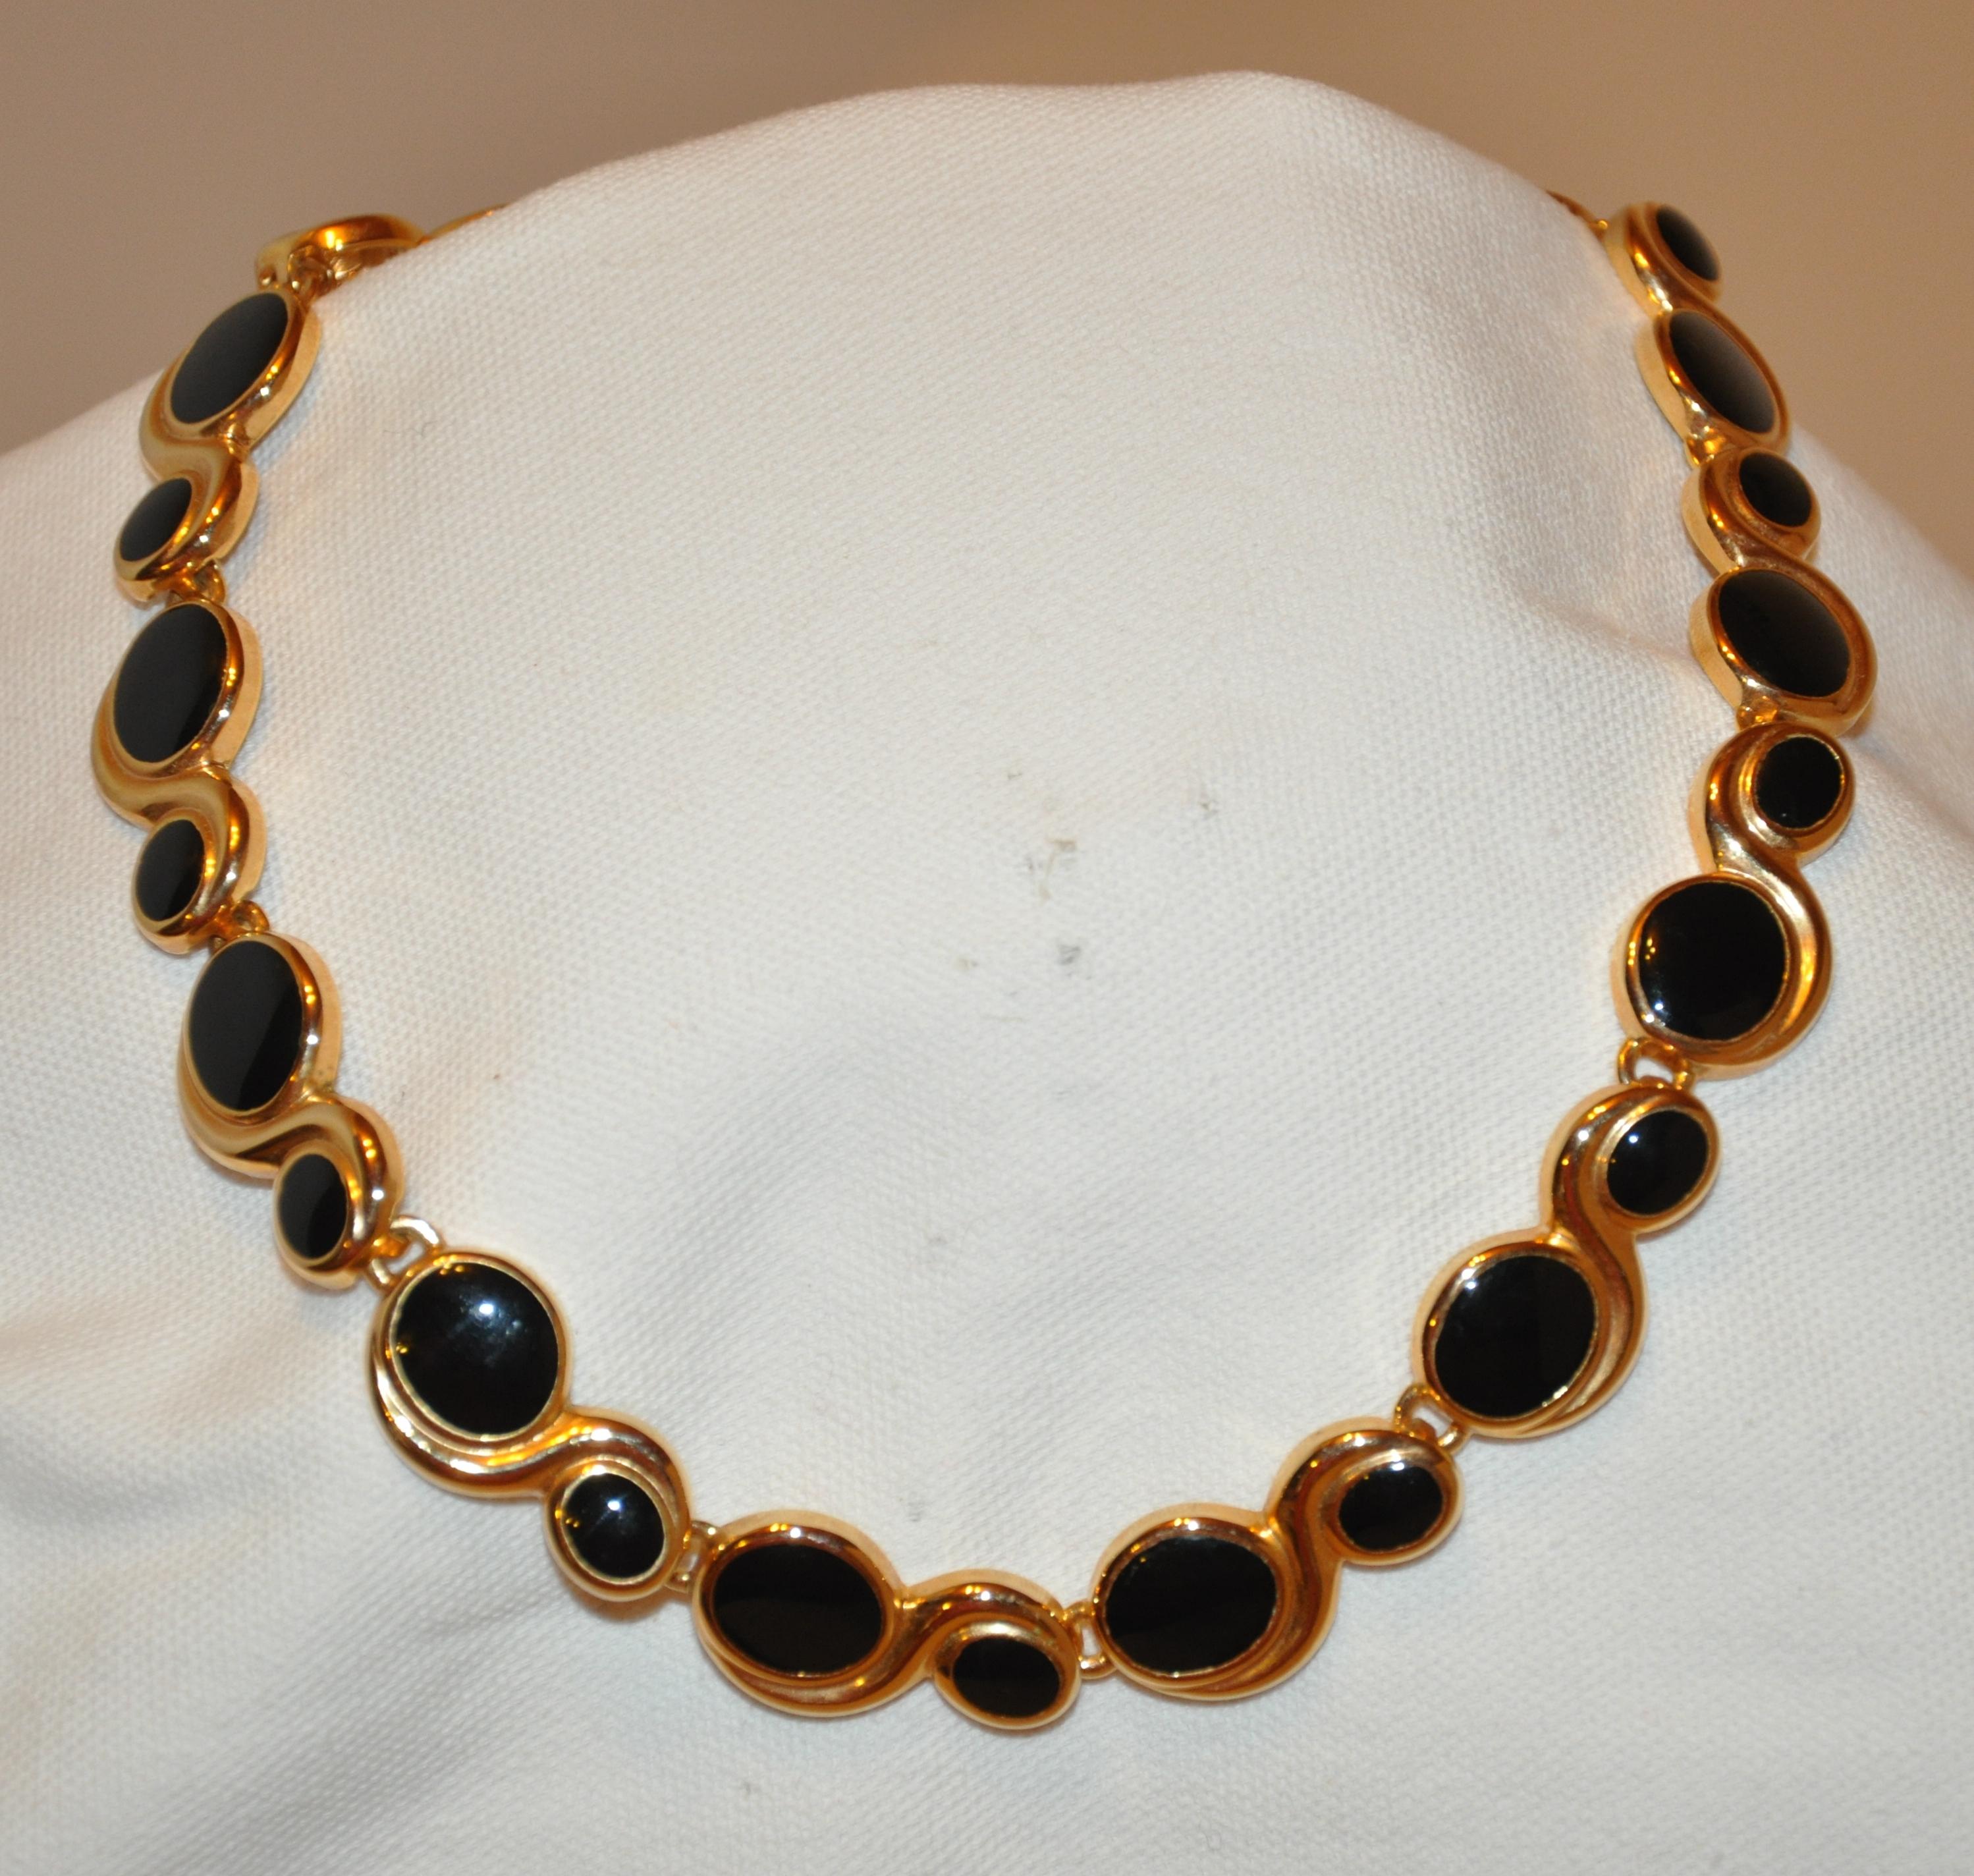        Wonderfully elegant, this sculpted gilded gold vermeil hardware choker necklace is accented with onyx-like stones. The necklace measures 18 inches in total length. Width measures 5/8 inch. Made in US.